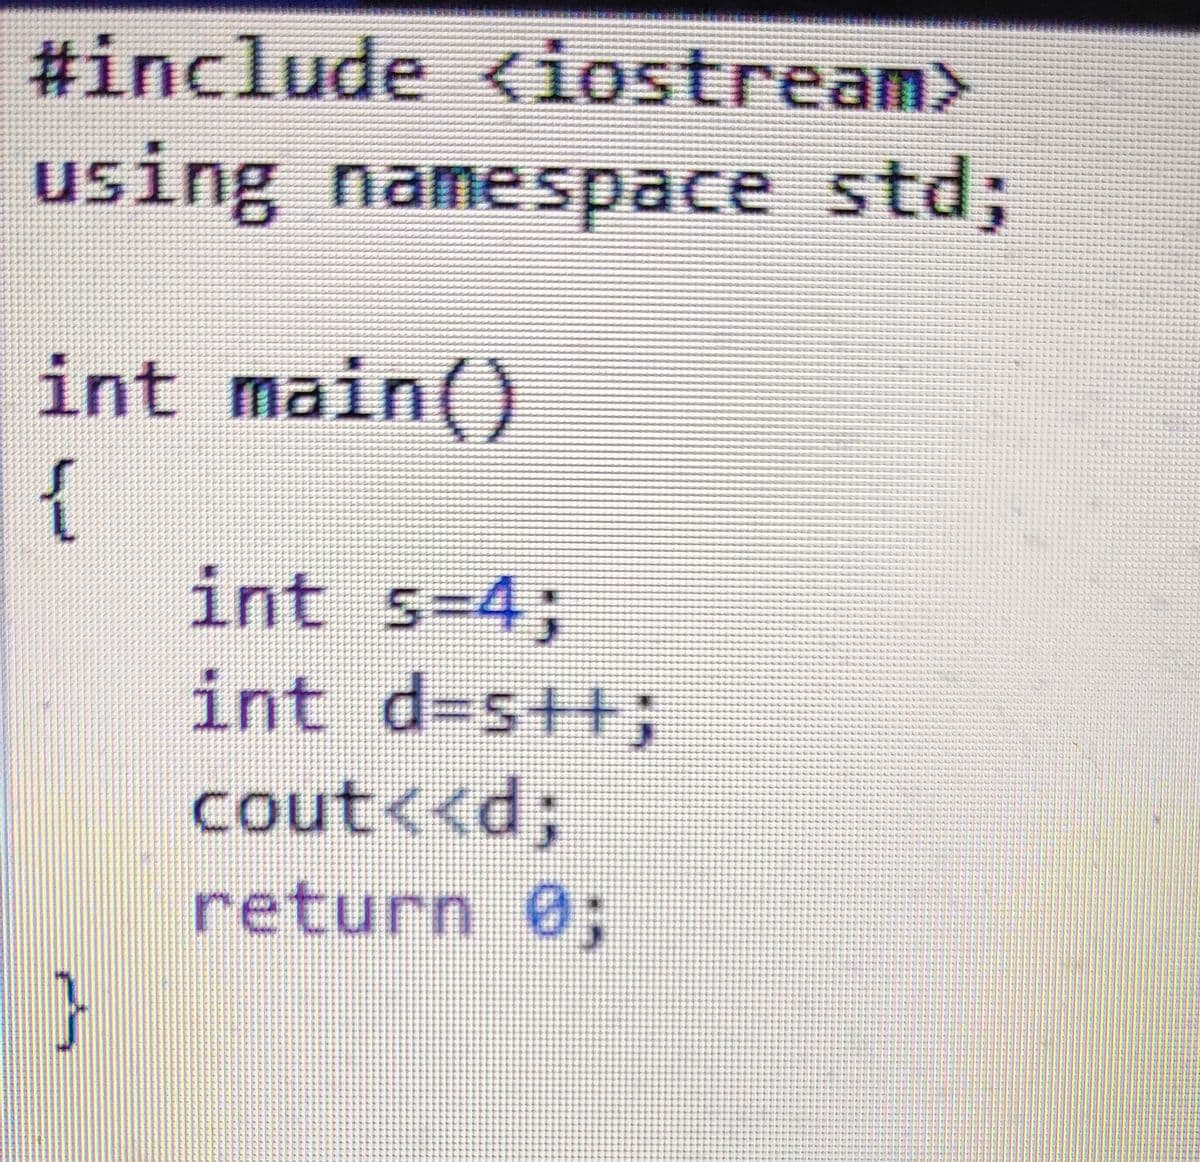 #include iostream>
using namespace std;
int main()
{
int s-4;
int d-s++3;
cout<<d;
return 0;
